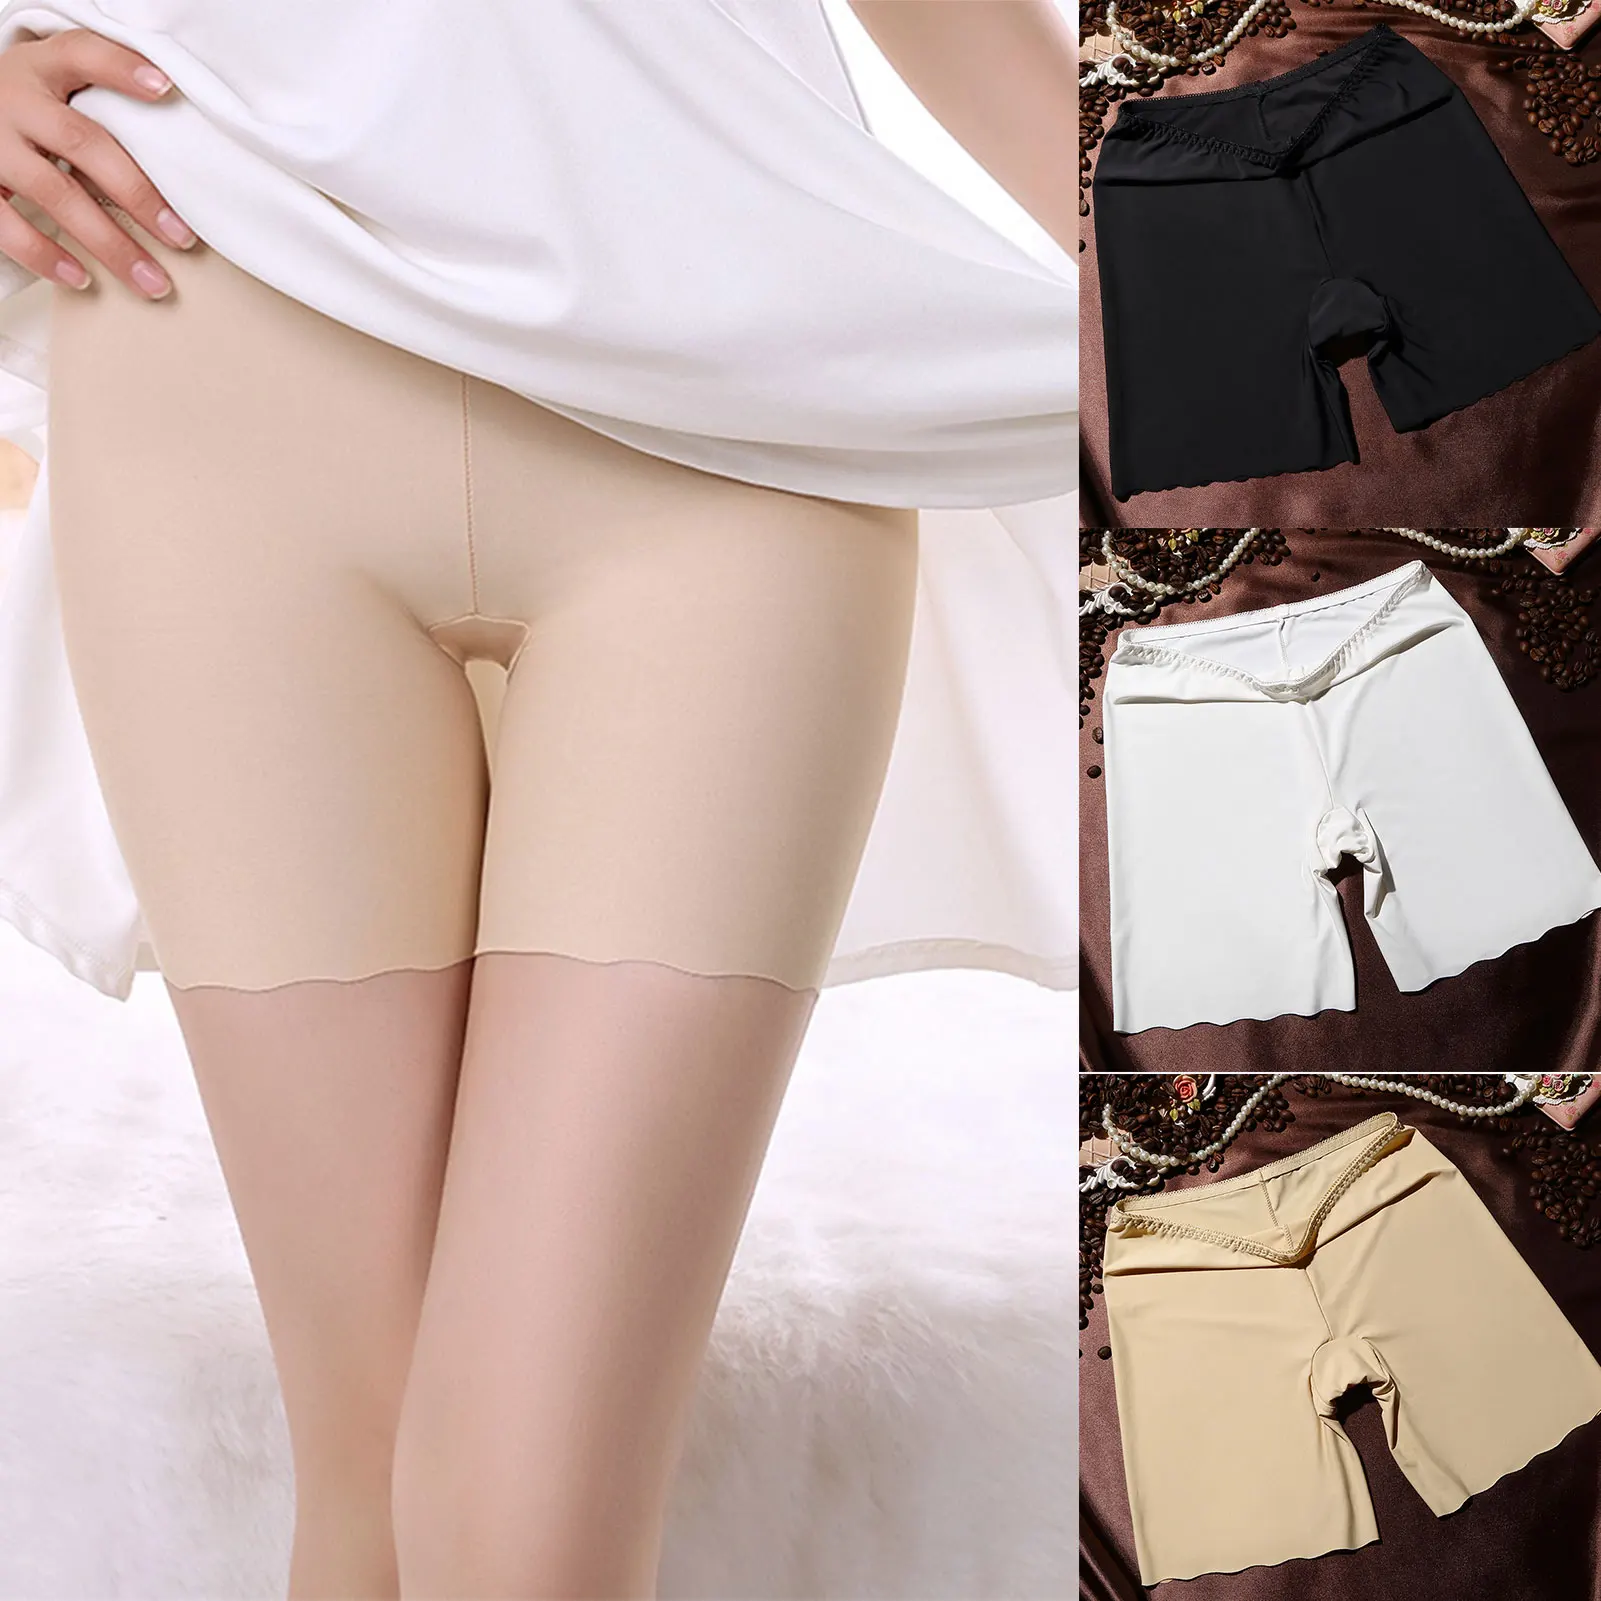 https://ae01.alicdn.com/kf/S79b44faebd90495a8f21fd80f41d6834o/Women-Seamless-Smooth-Slip-Shorts-for-Under-Dress-Comfortable-Thin-Short-Pants-for-Summer-Mid-Length.jpg